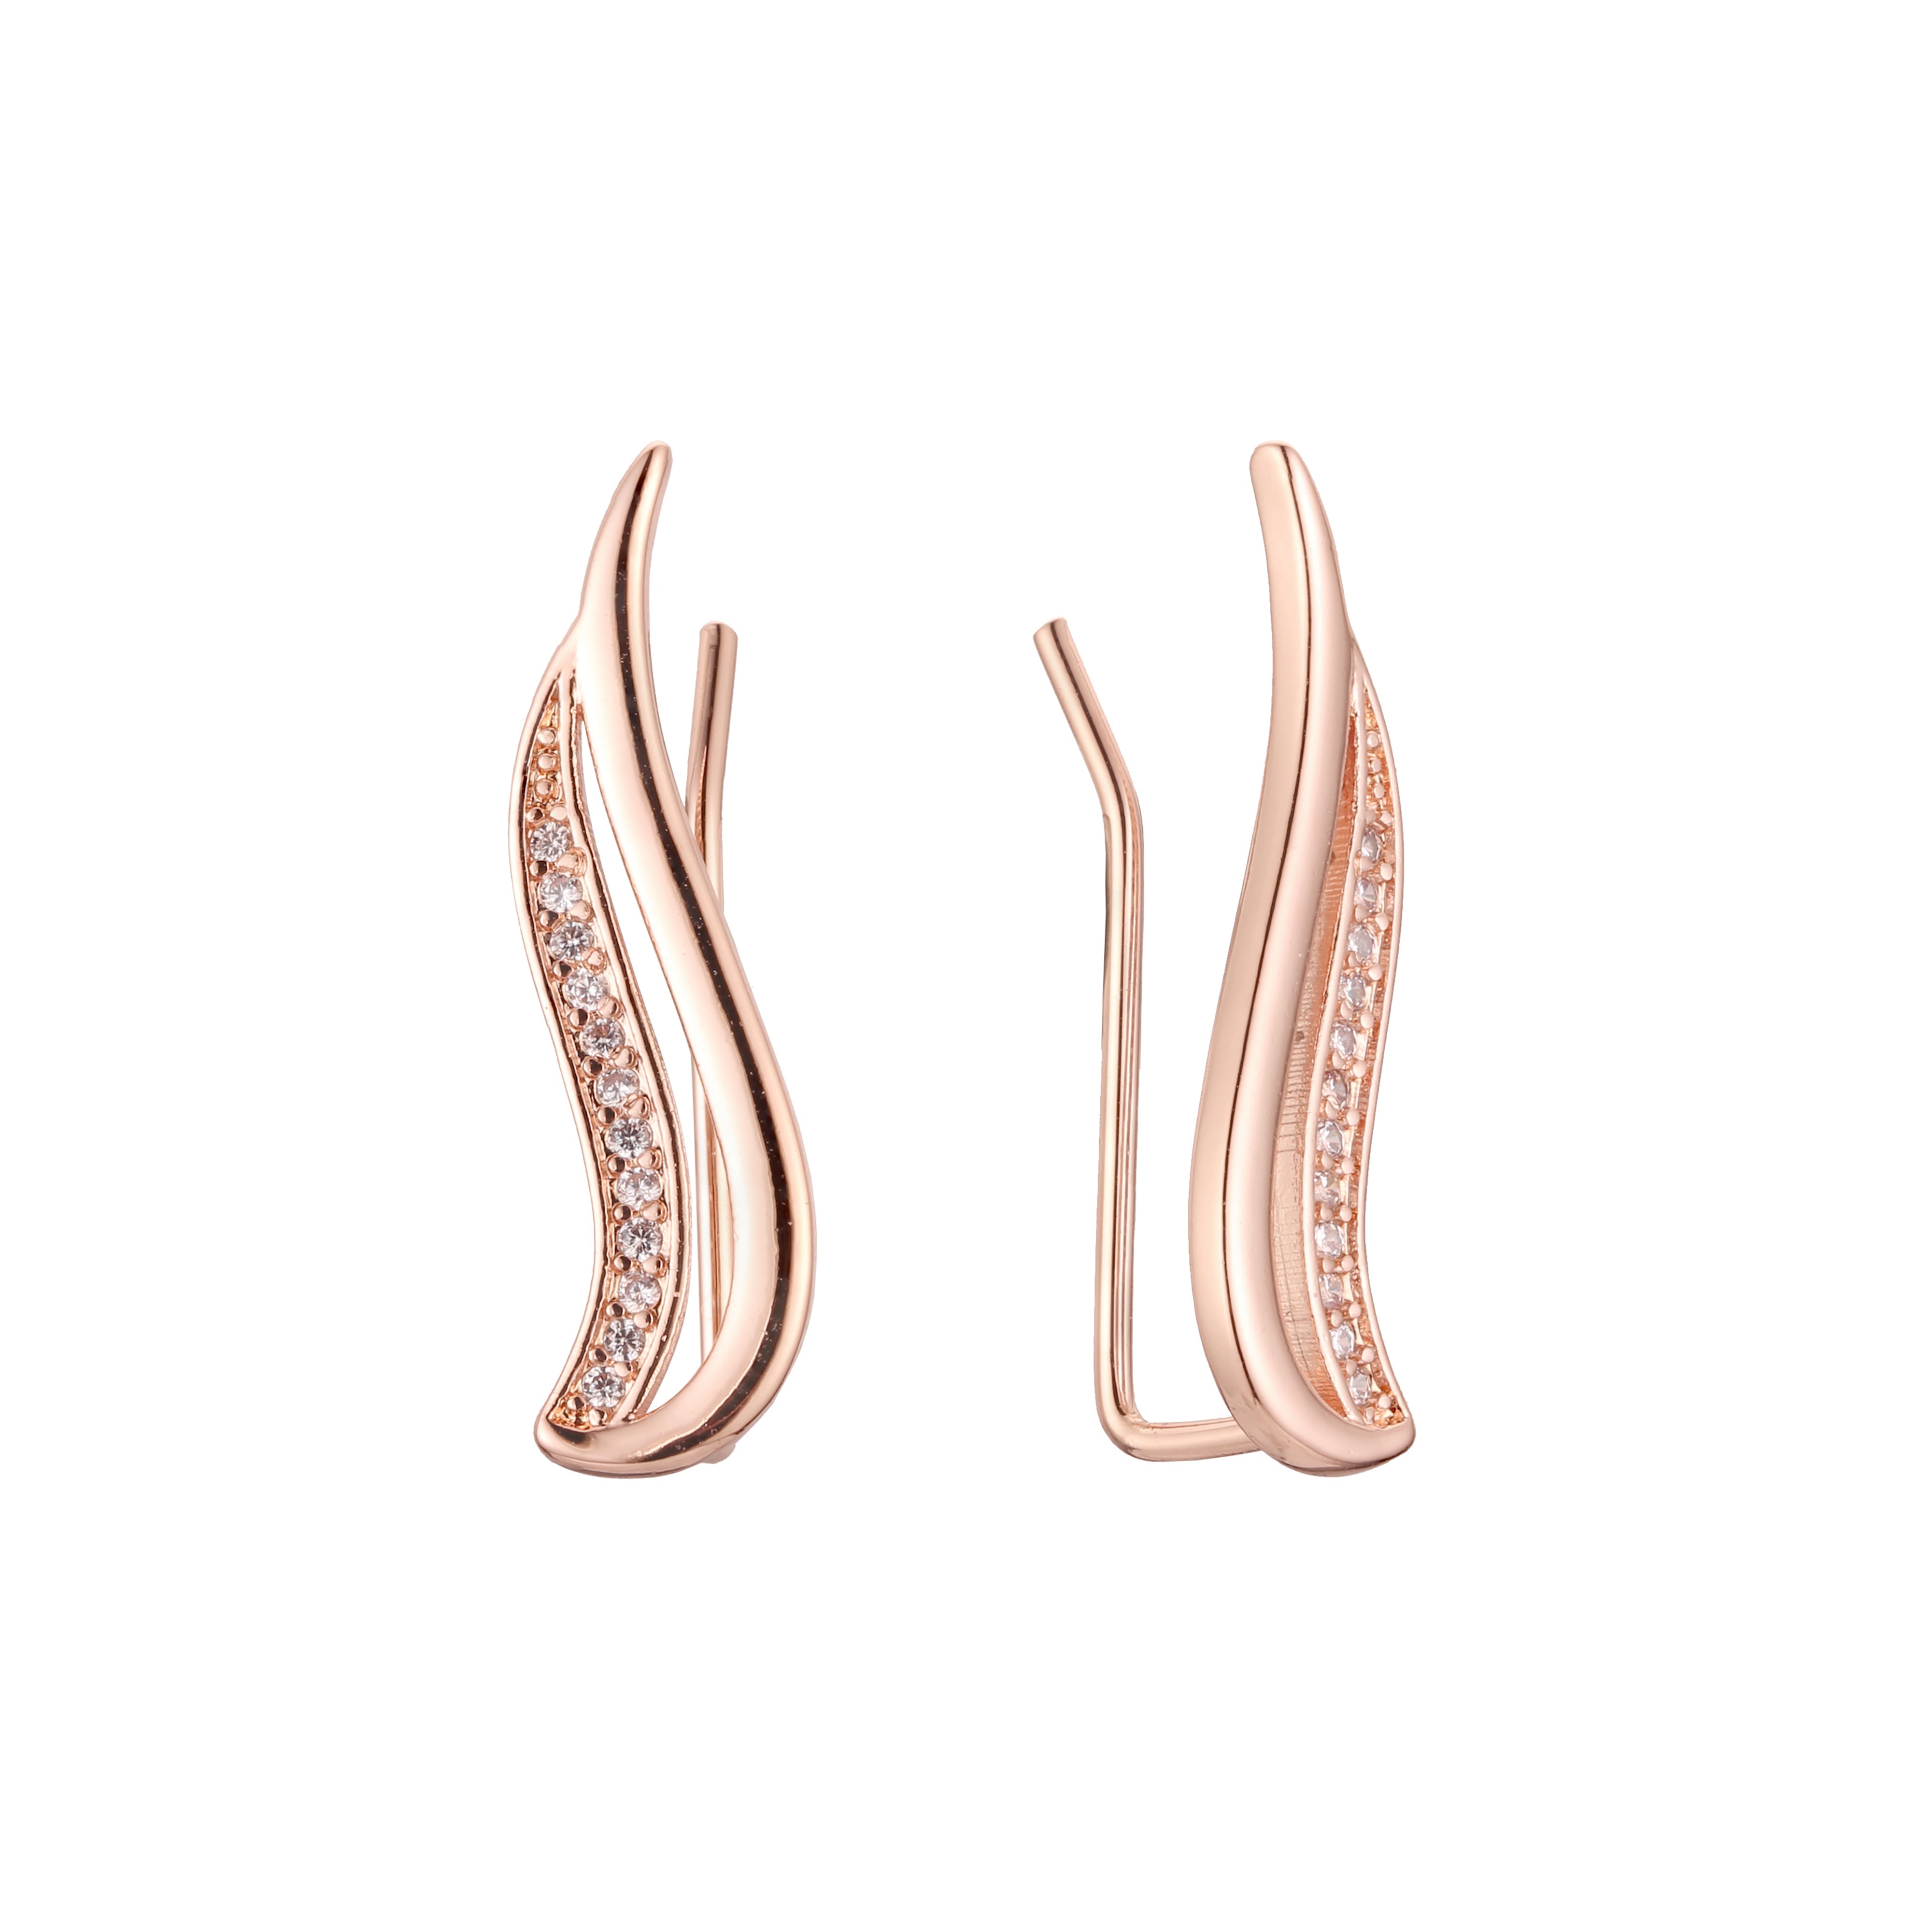 Tall fire flames crawler earrings in 14K Gold, Rose Gold, two tone plating colors